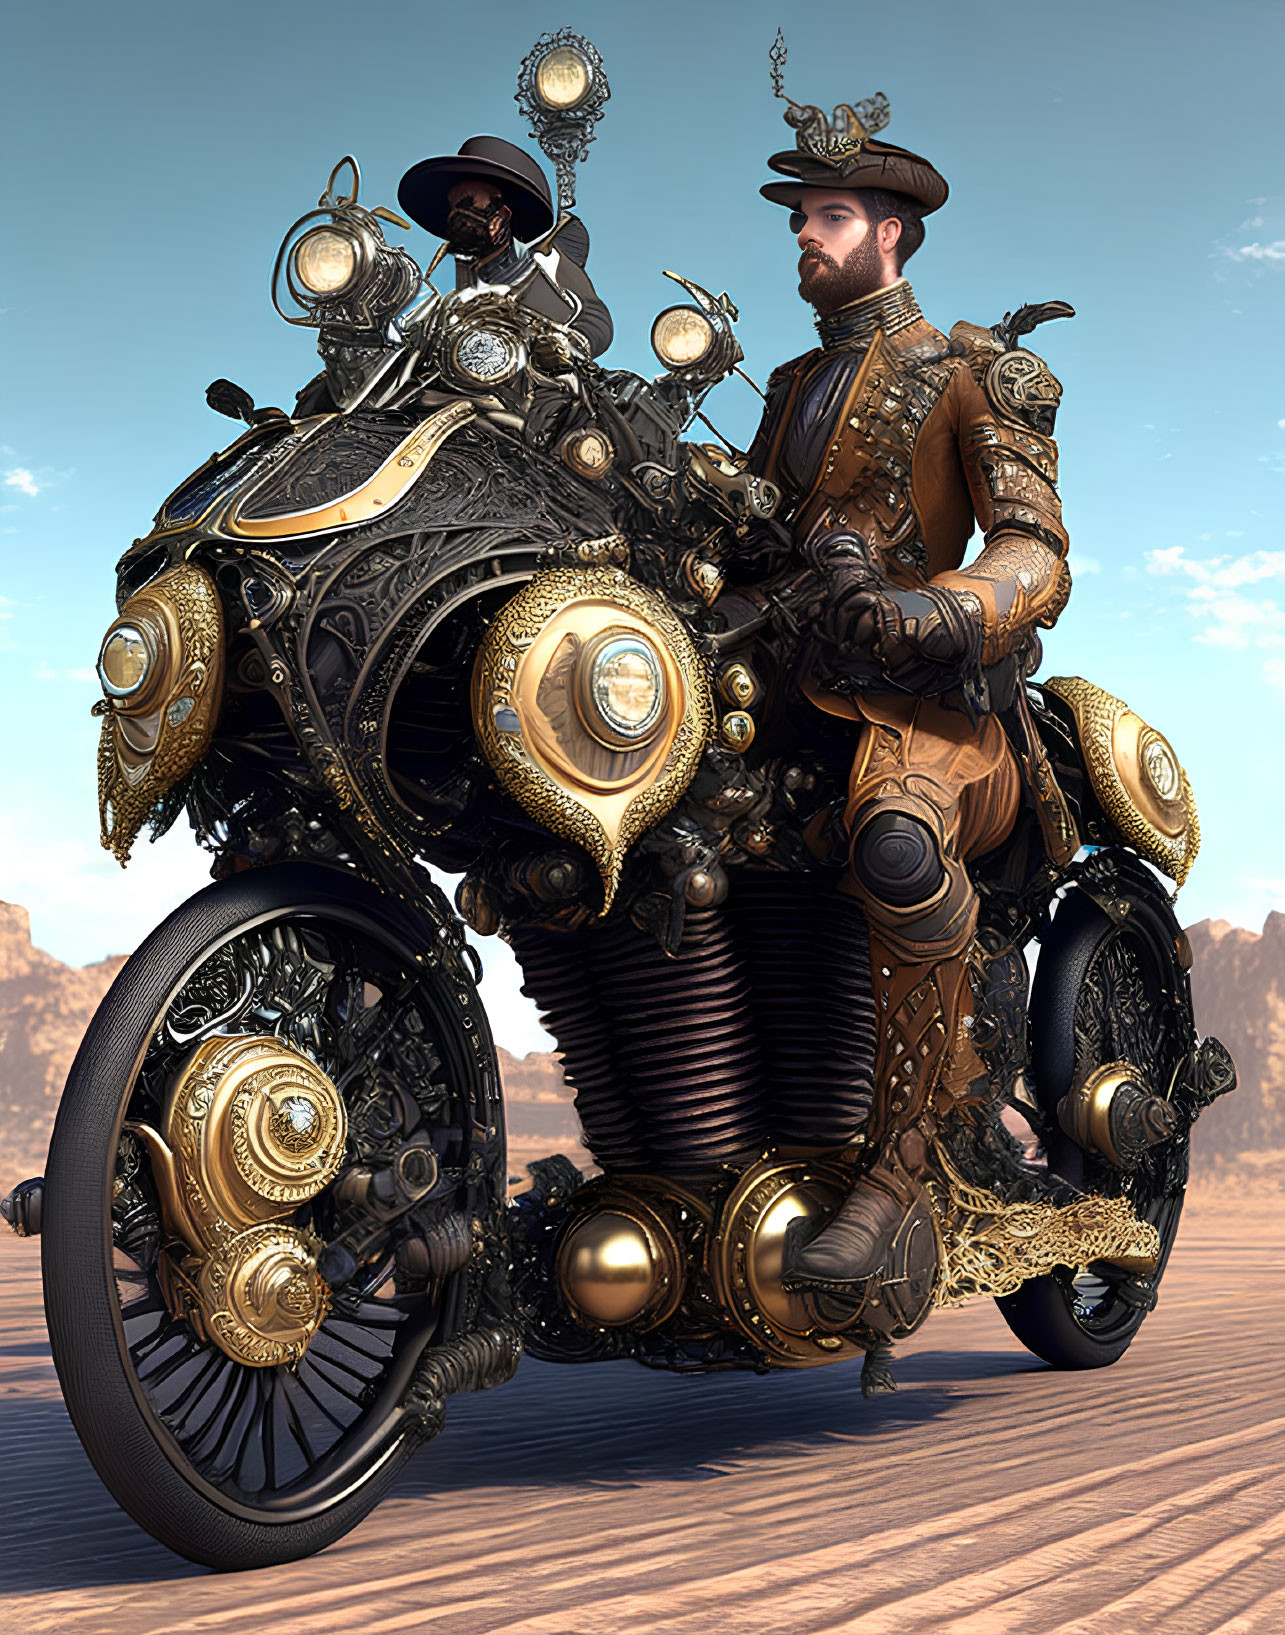 Steampunk-themed vintage motorcycle ride in desert setting